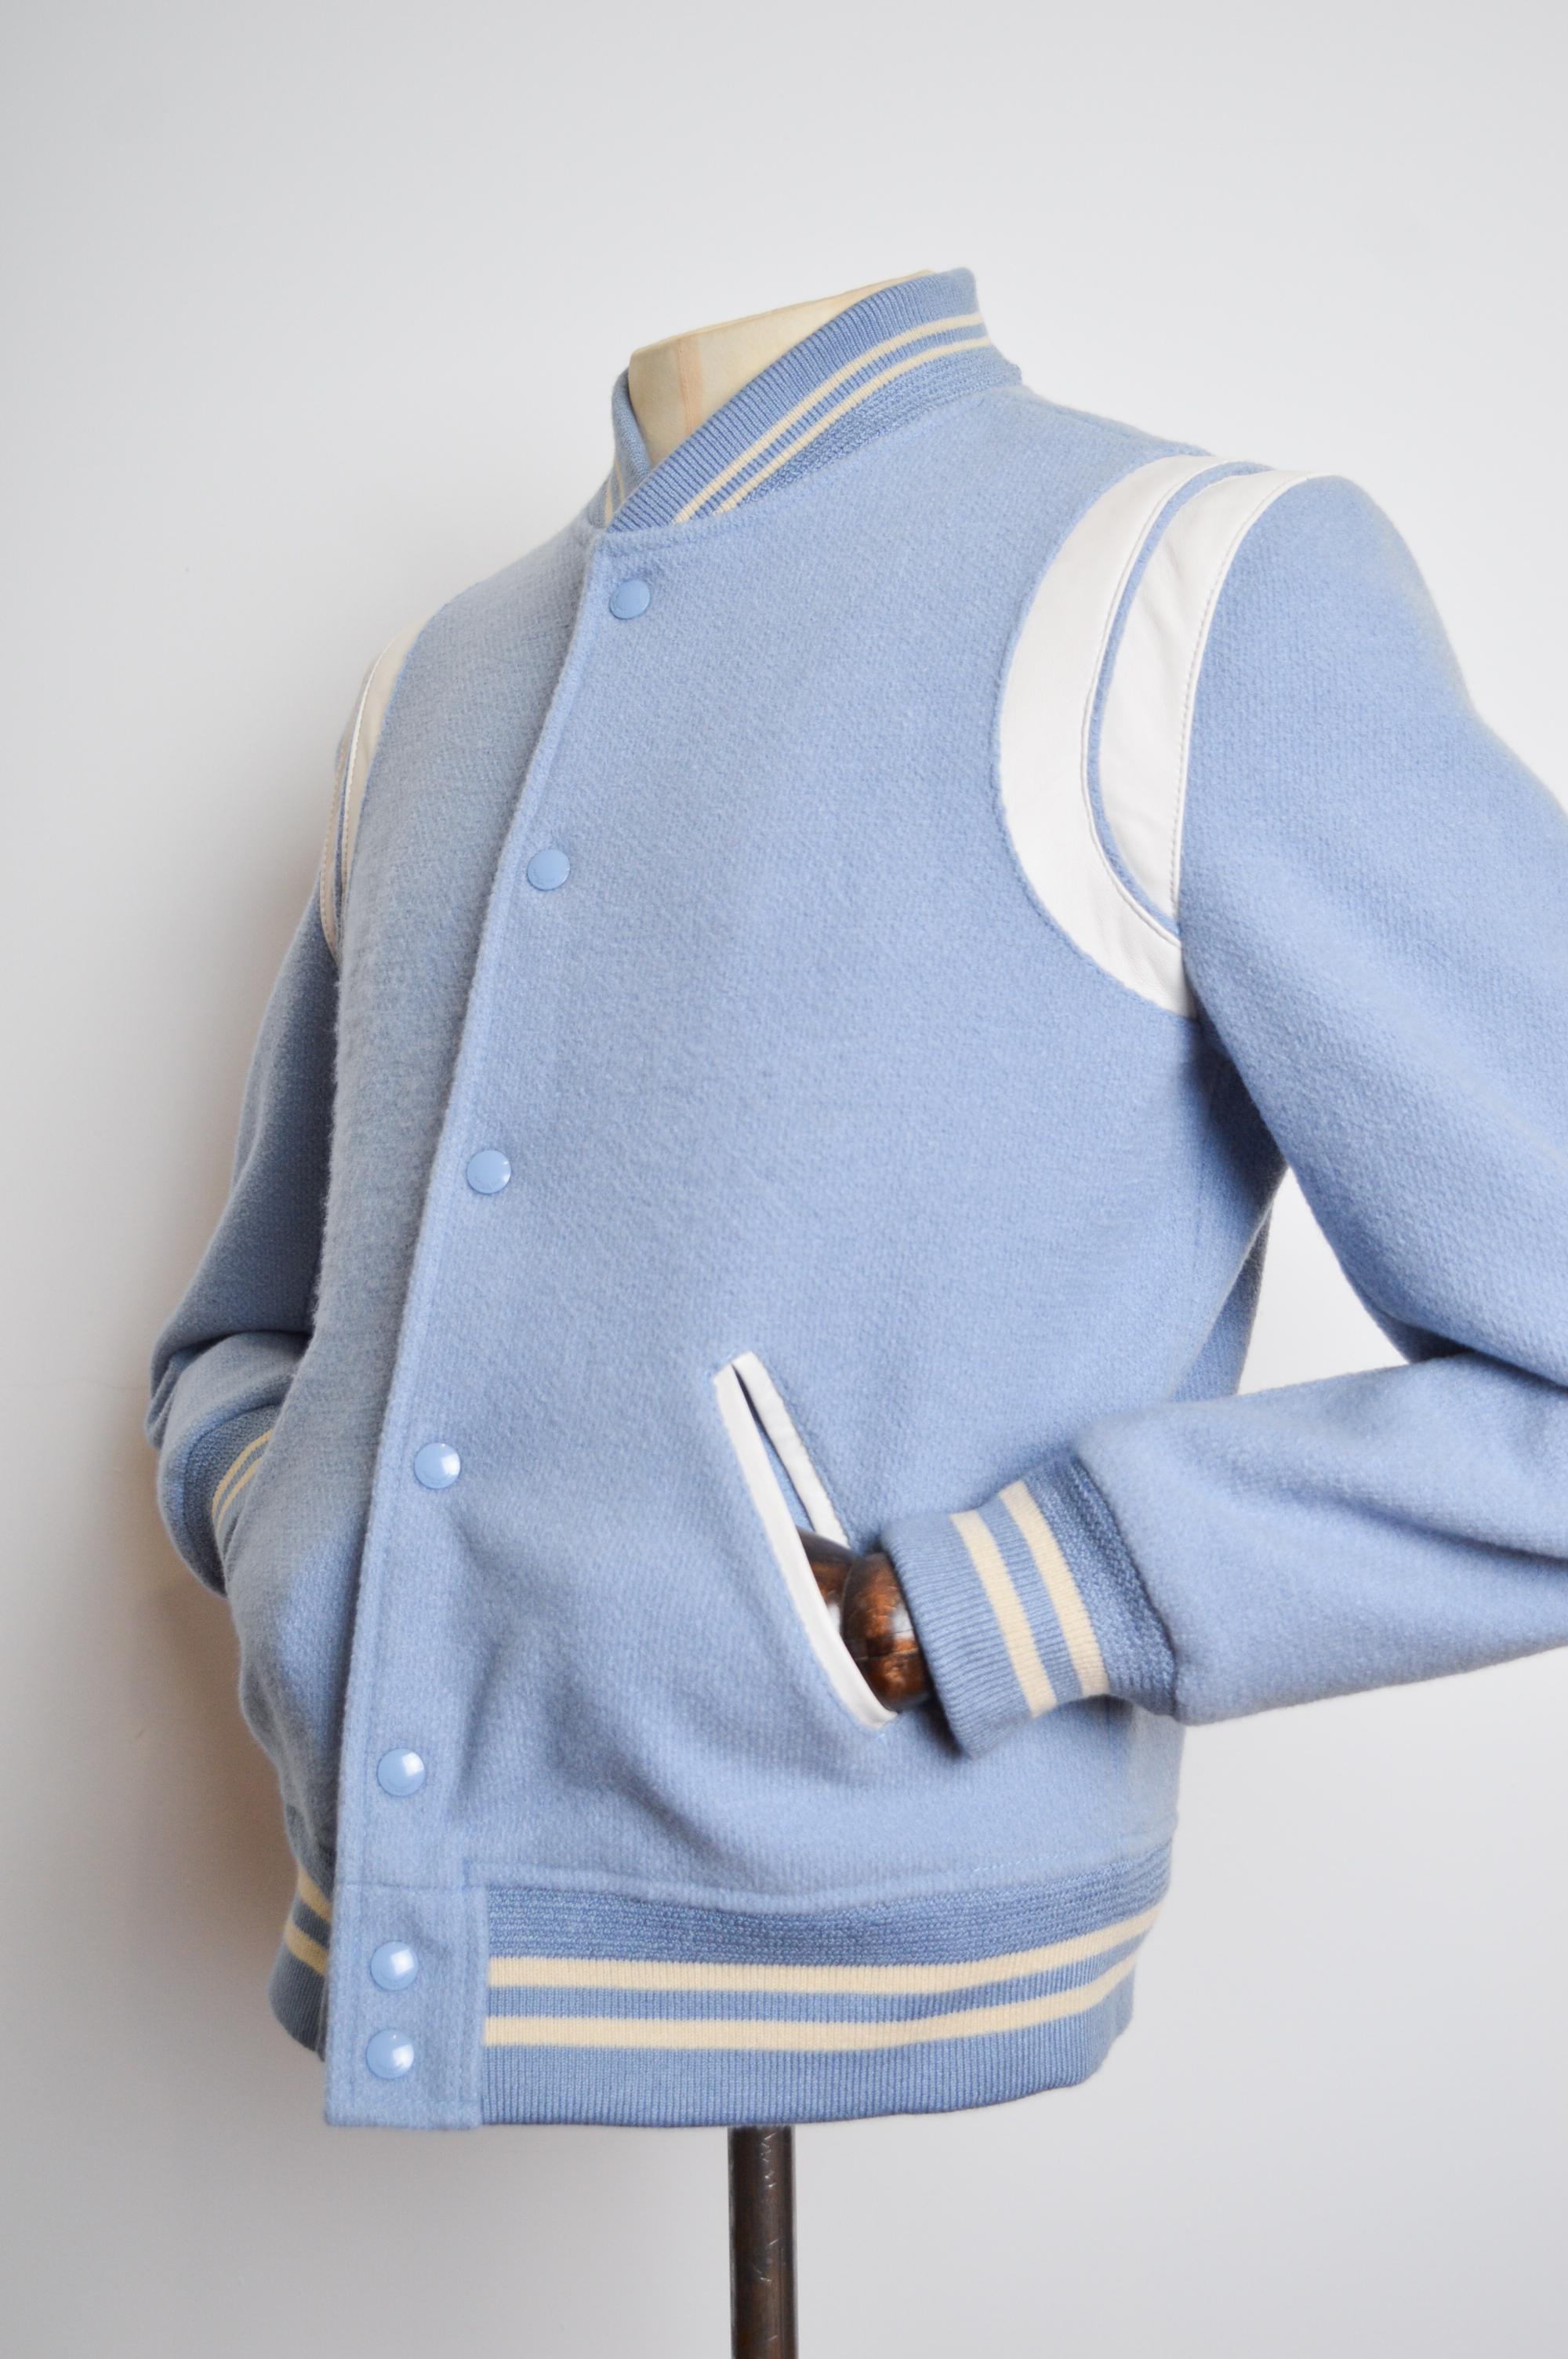 SS 2016 Saint Laurent Teddy Baby Blue Wool Varsity Bomber Jacket In Good Condition For Sale In Sheffield, GB